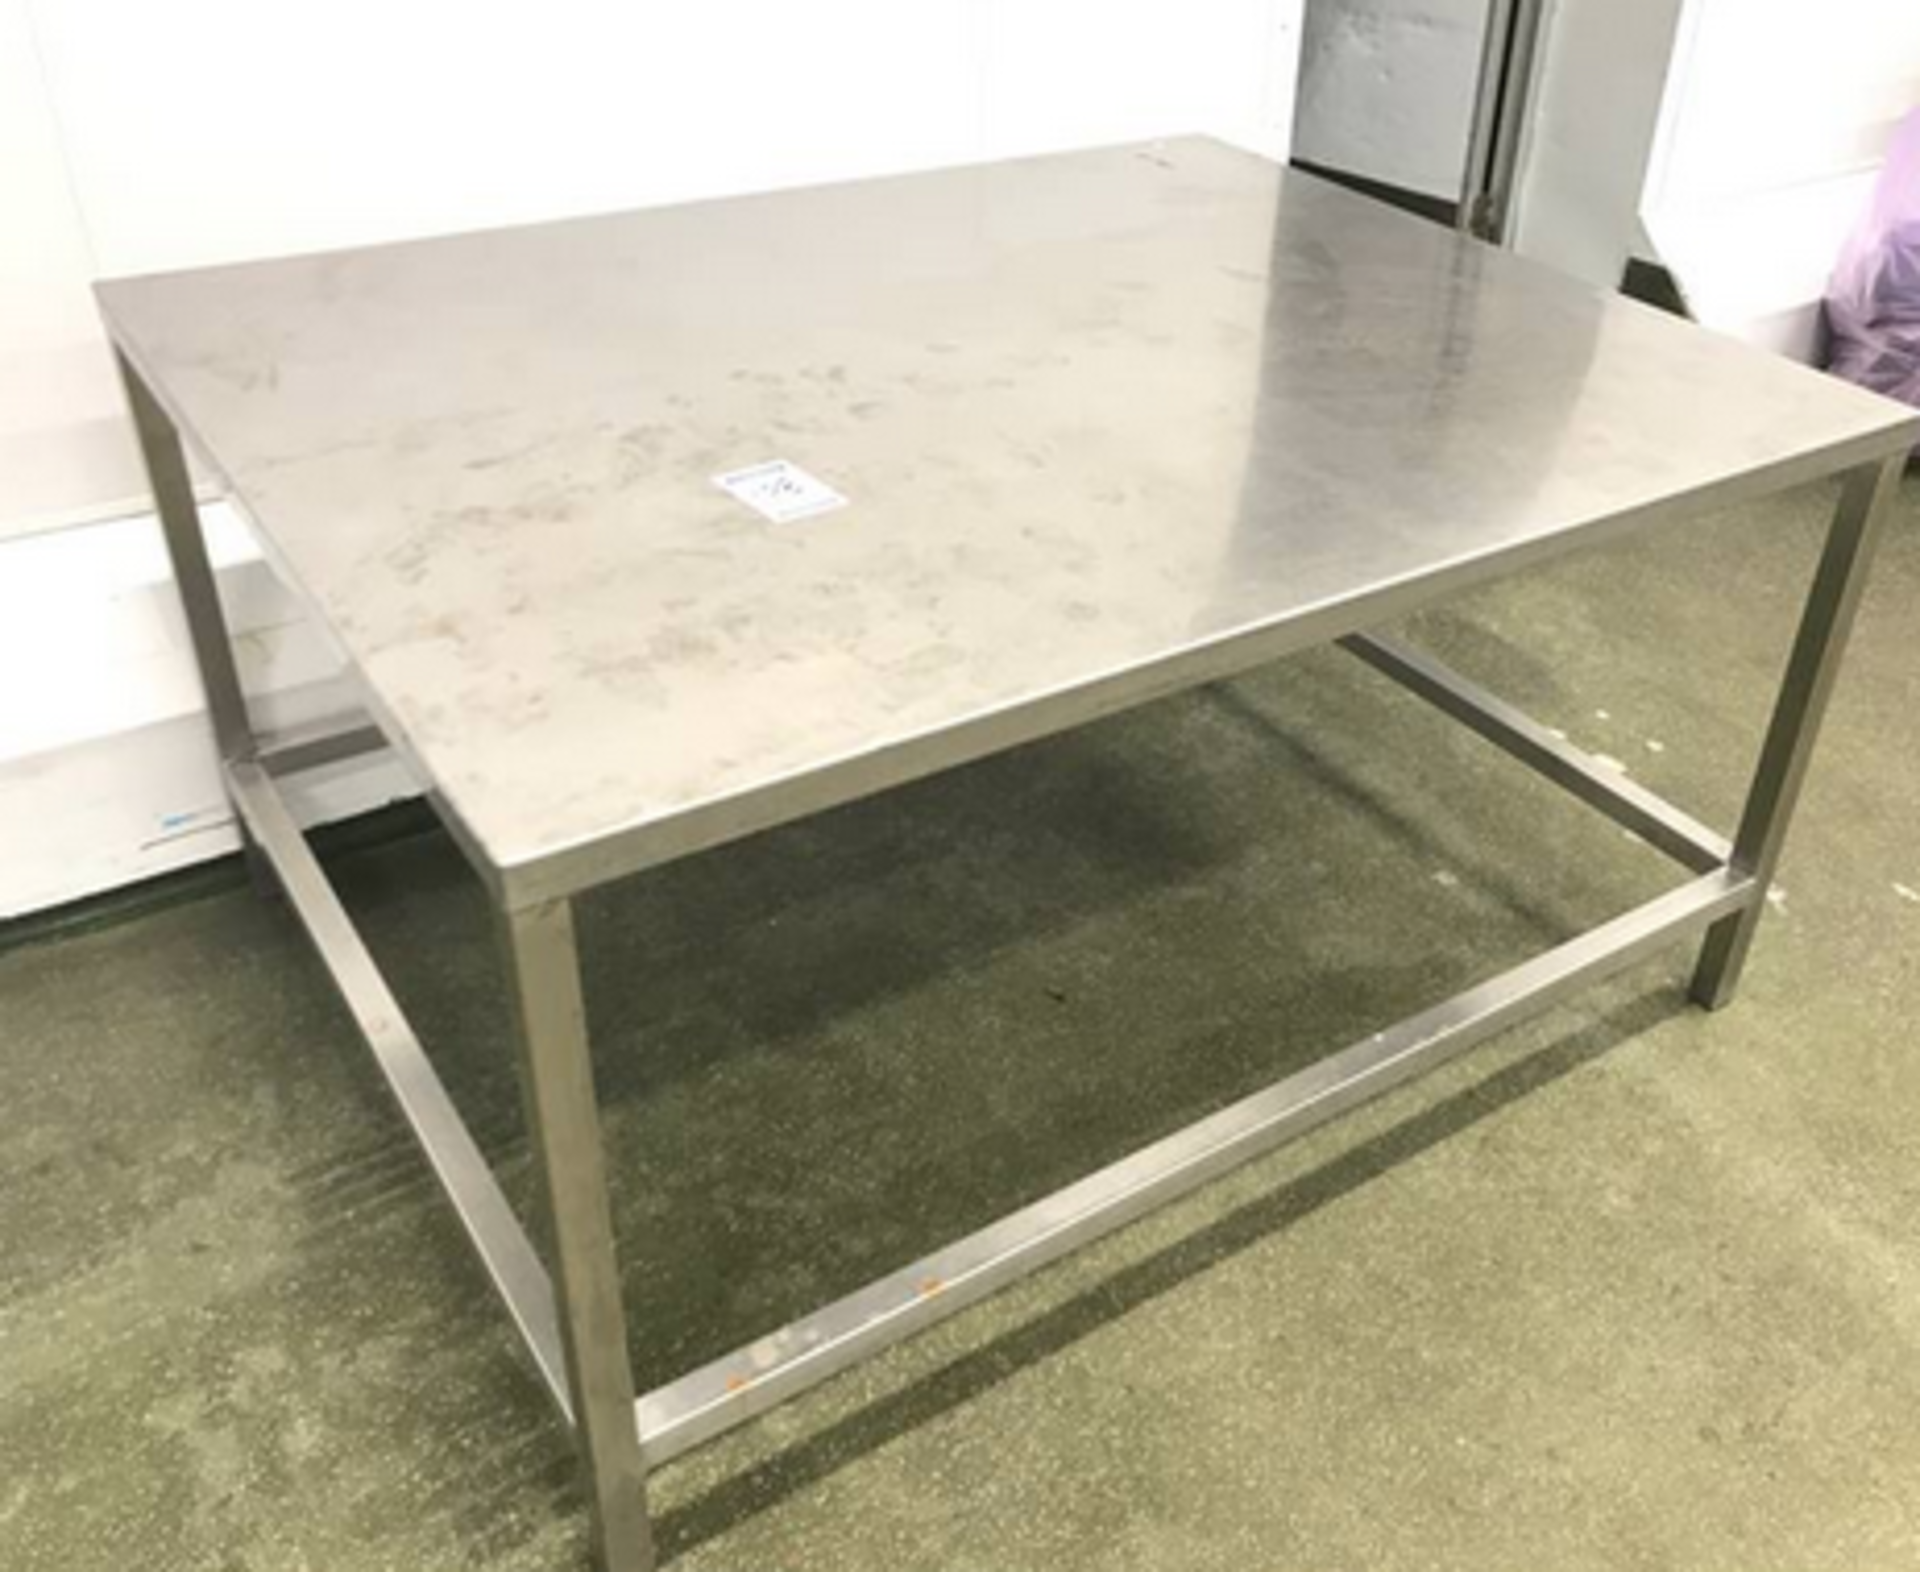 STAINLESS STEEL TABLE. - Image 3 of 3